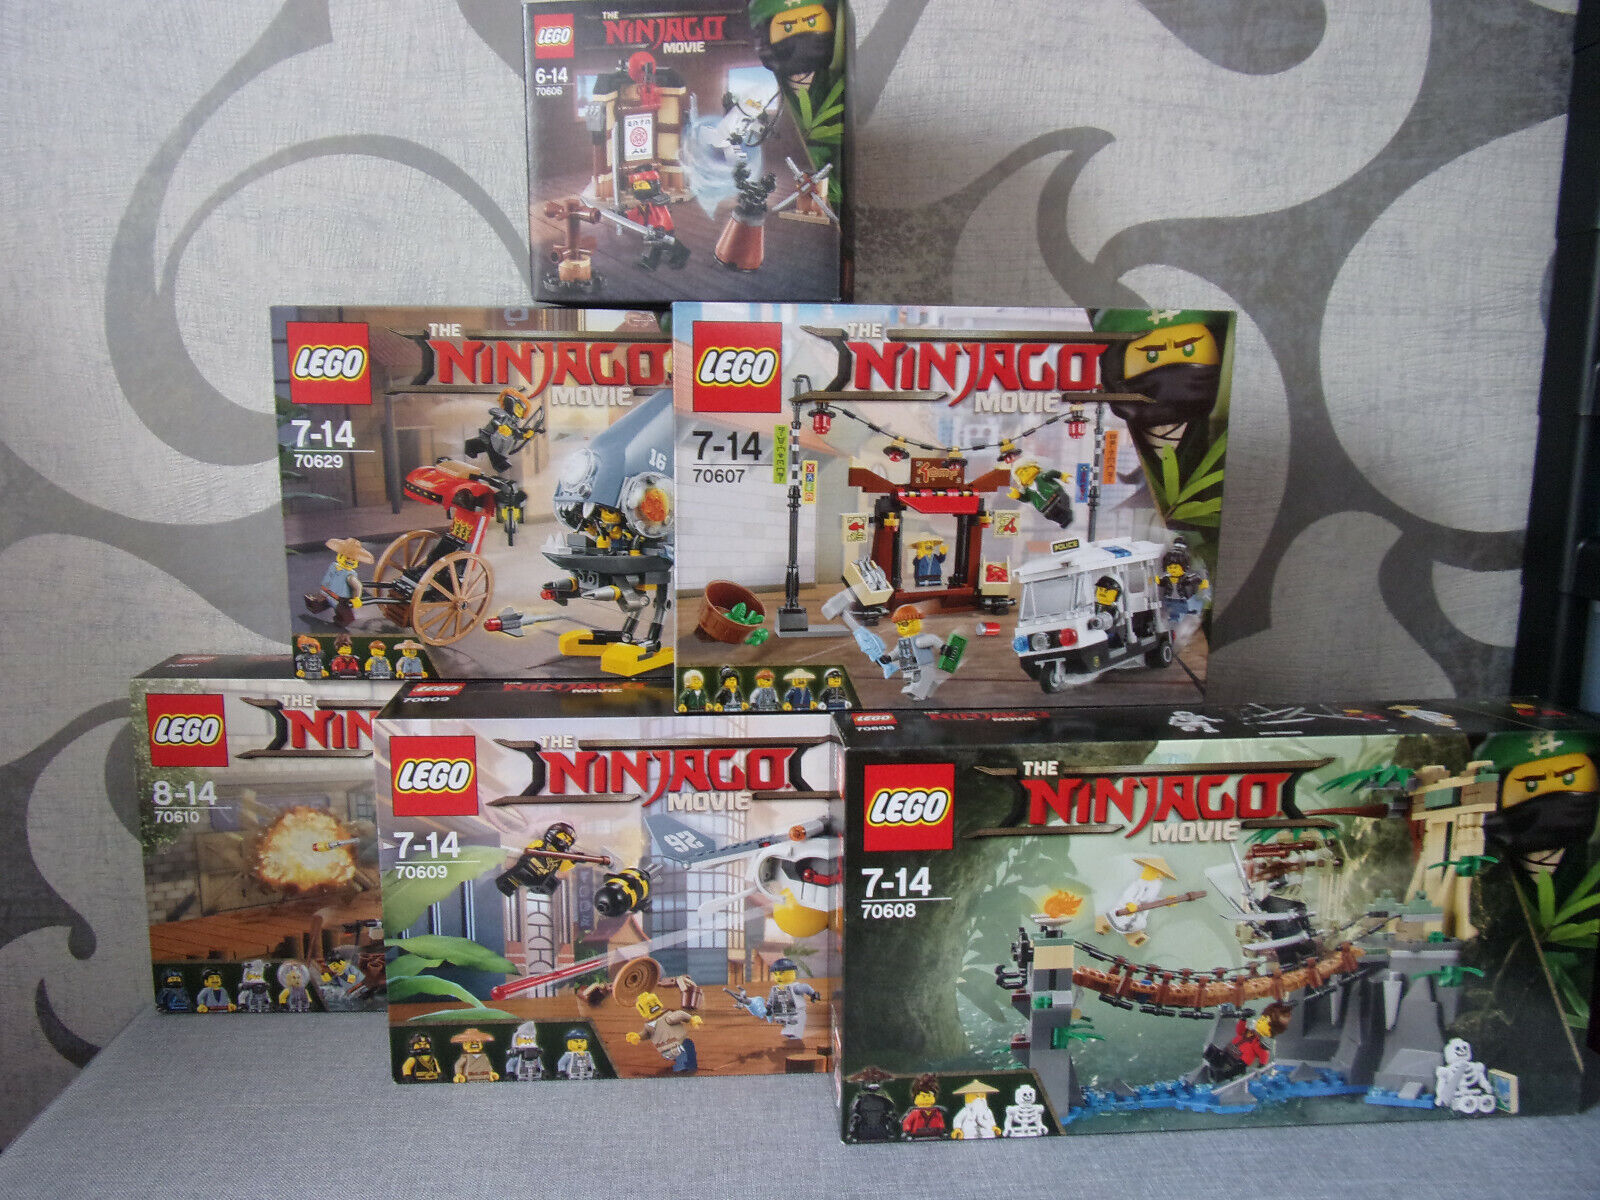 The Lego Ninjago Movie - Various sets to choose from - New & OVP